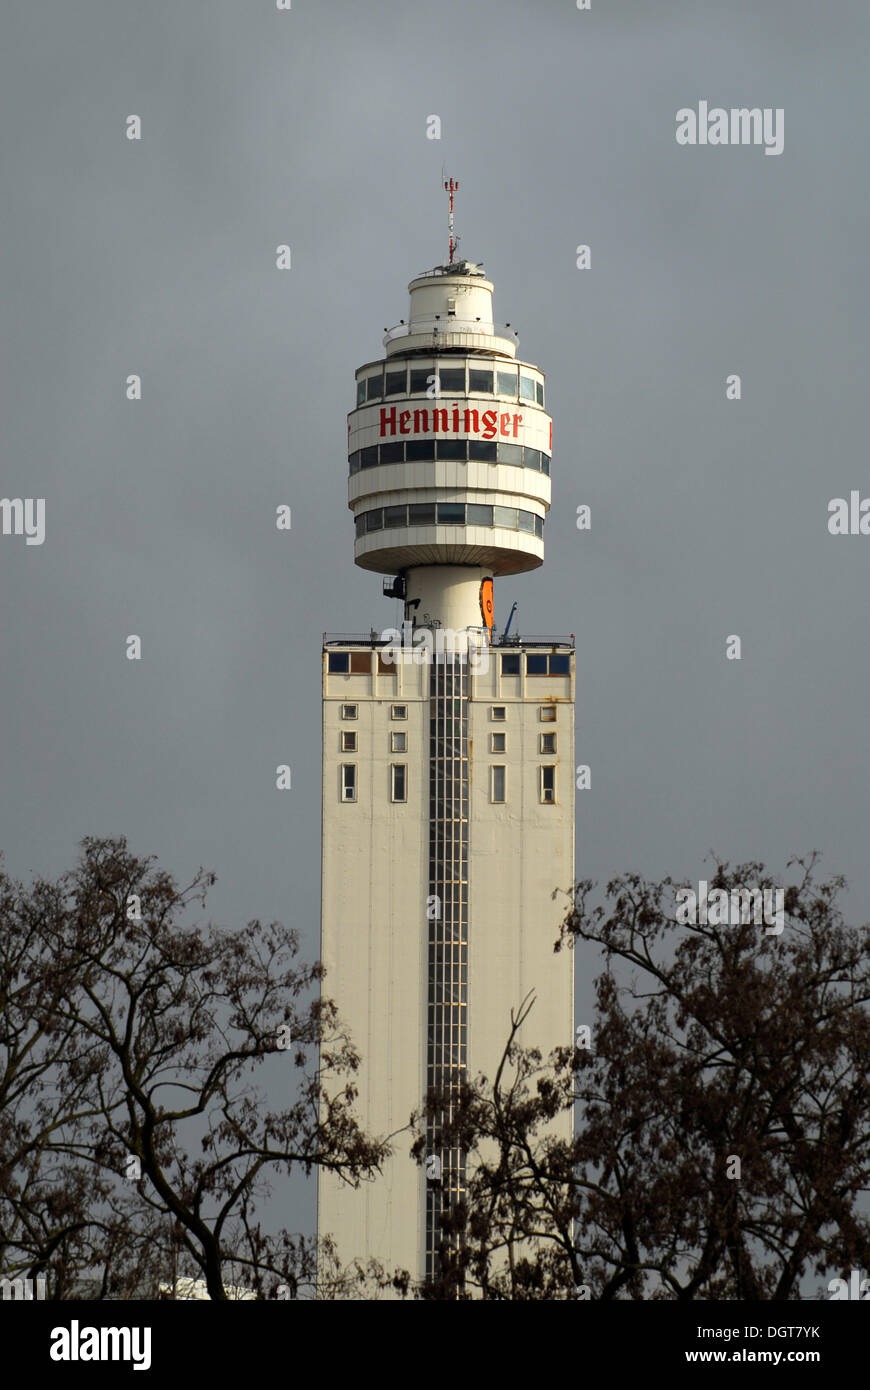 Henninger Turm, a tower in Frankfurt-Sachsenhausen, former silo of the Henninger brewery with a restaurant and viewing platform Stock Photo